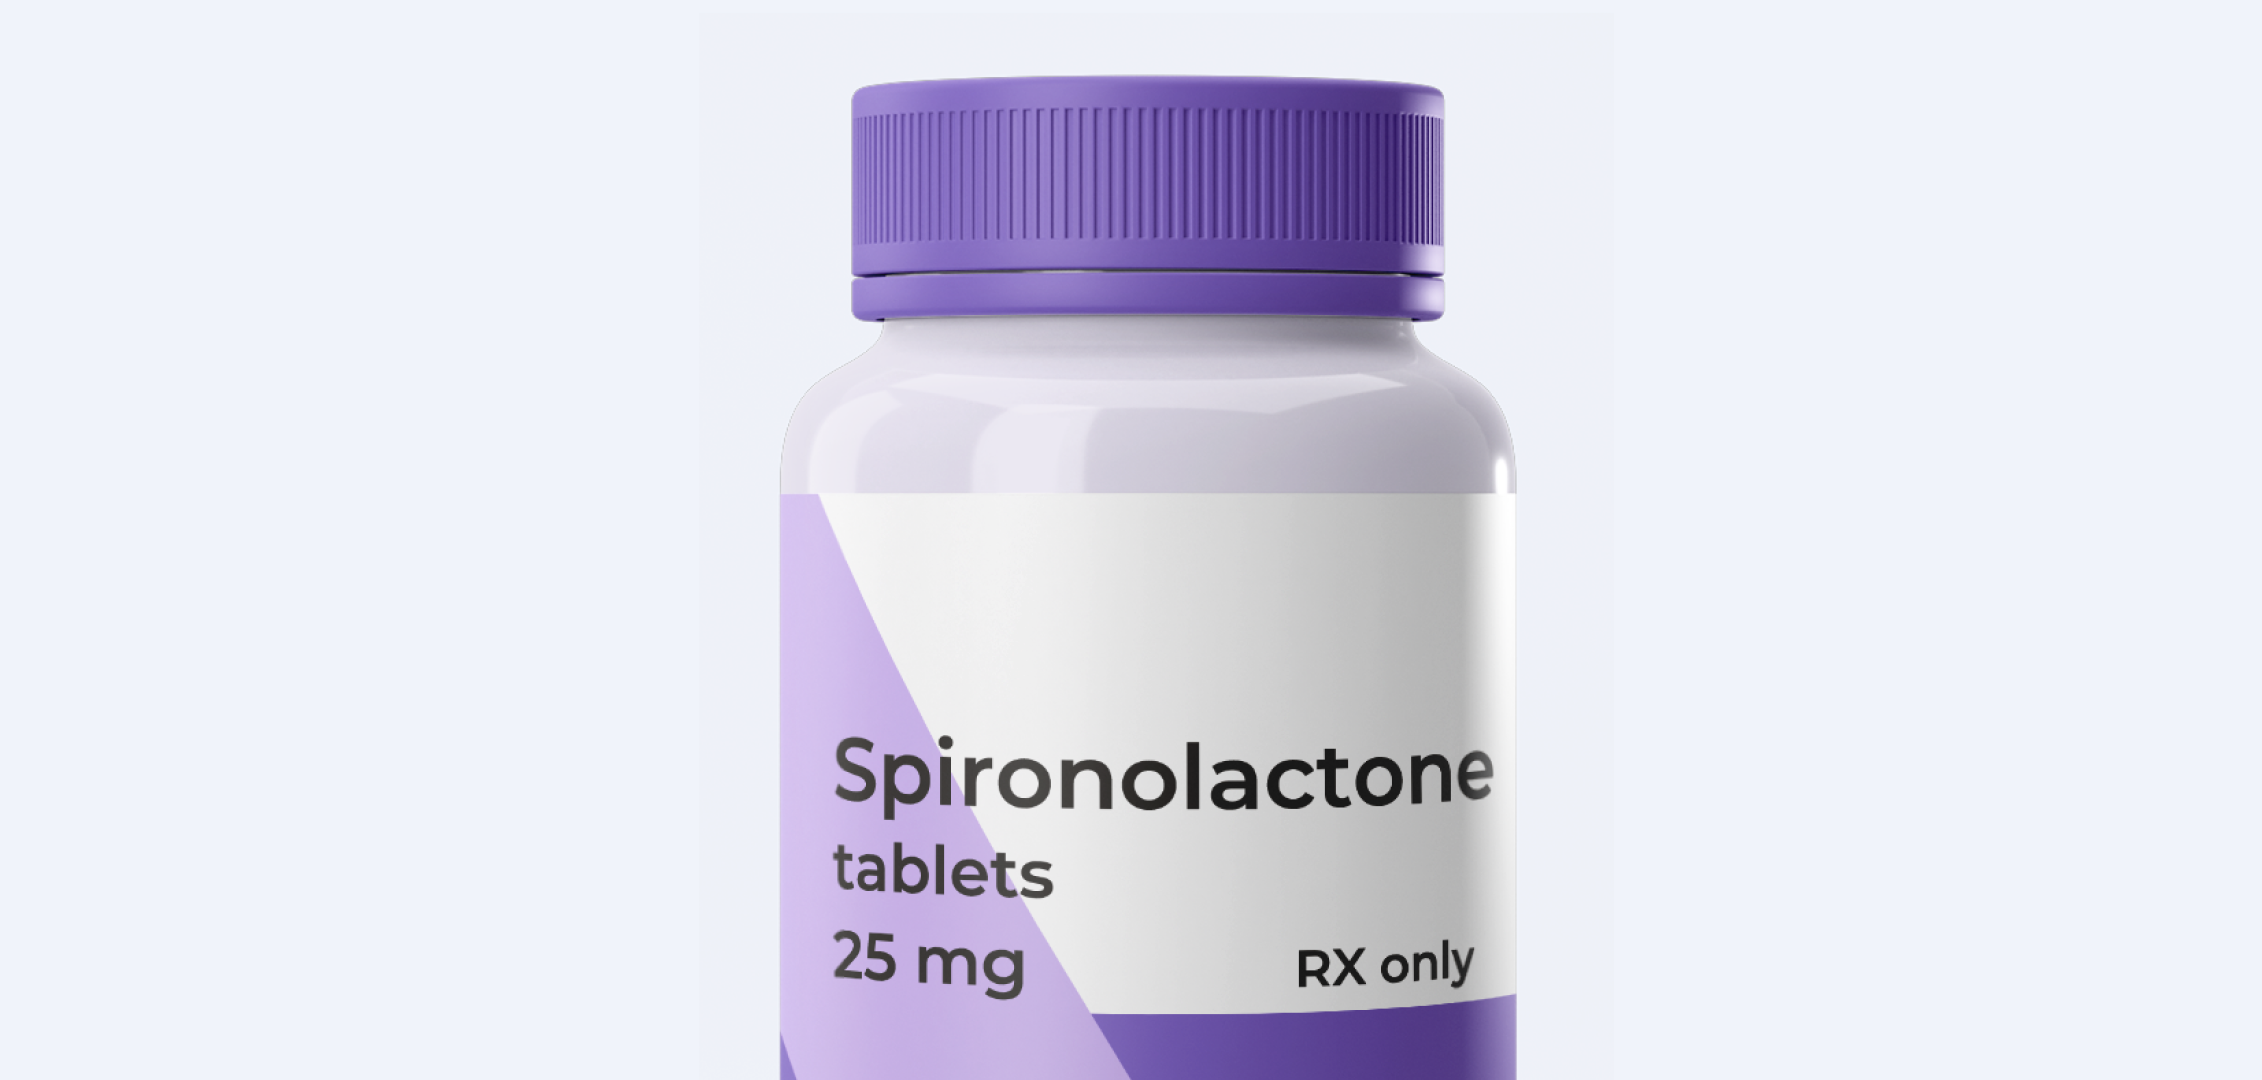 oral spironolactone for hair loss in women